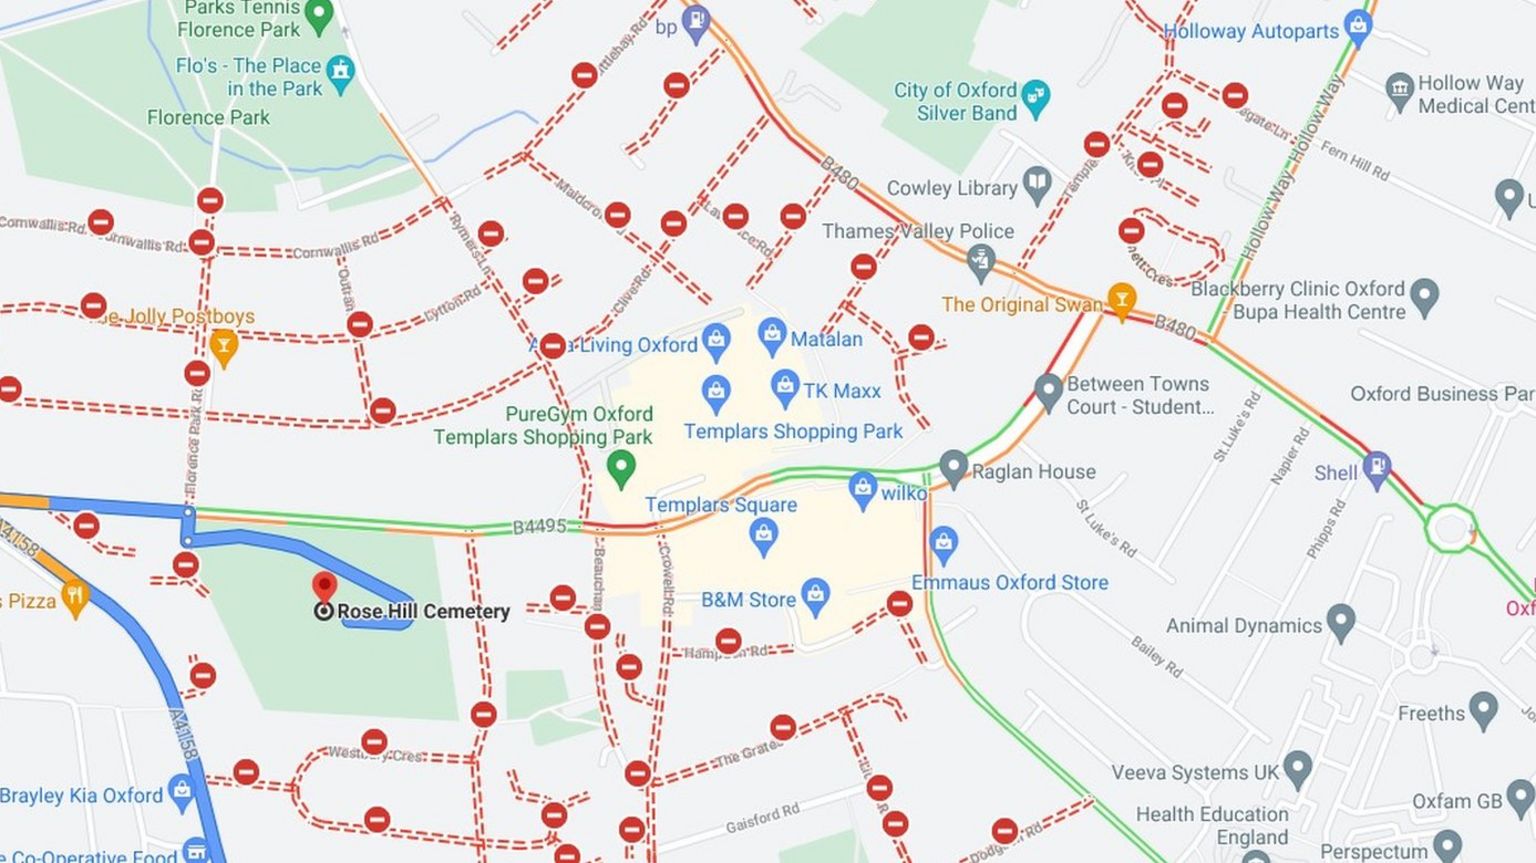 Roads shown as closed on Google maps